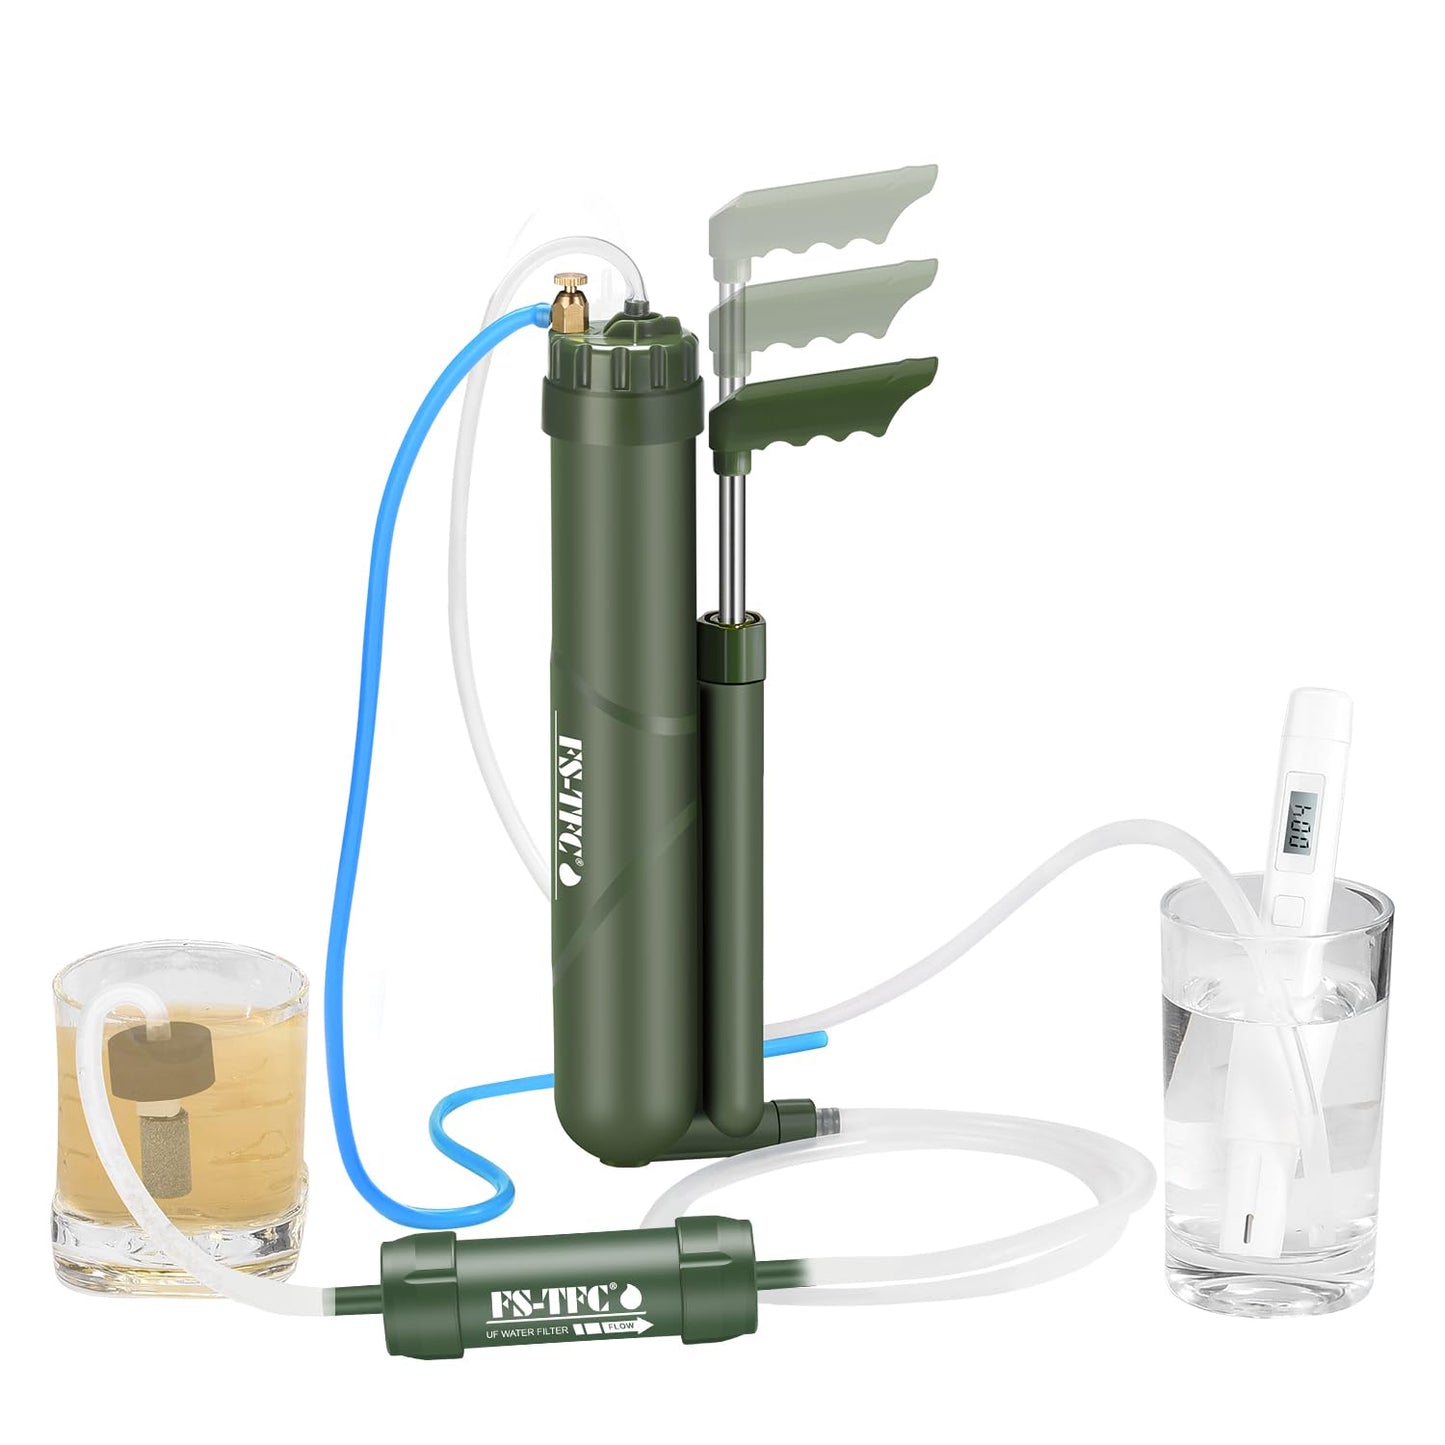 Portable Reverse Osmosis Water Filtration System 0.0001 Micron Super-High Precision Water Purification Survival Gear for Hiking, Camping, Travel, and Emergency Preparedness